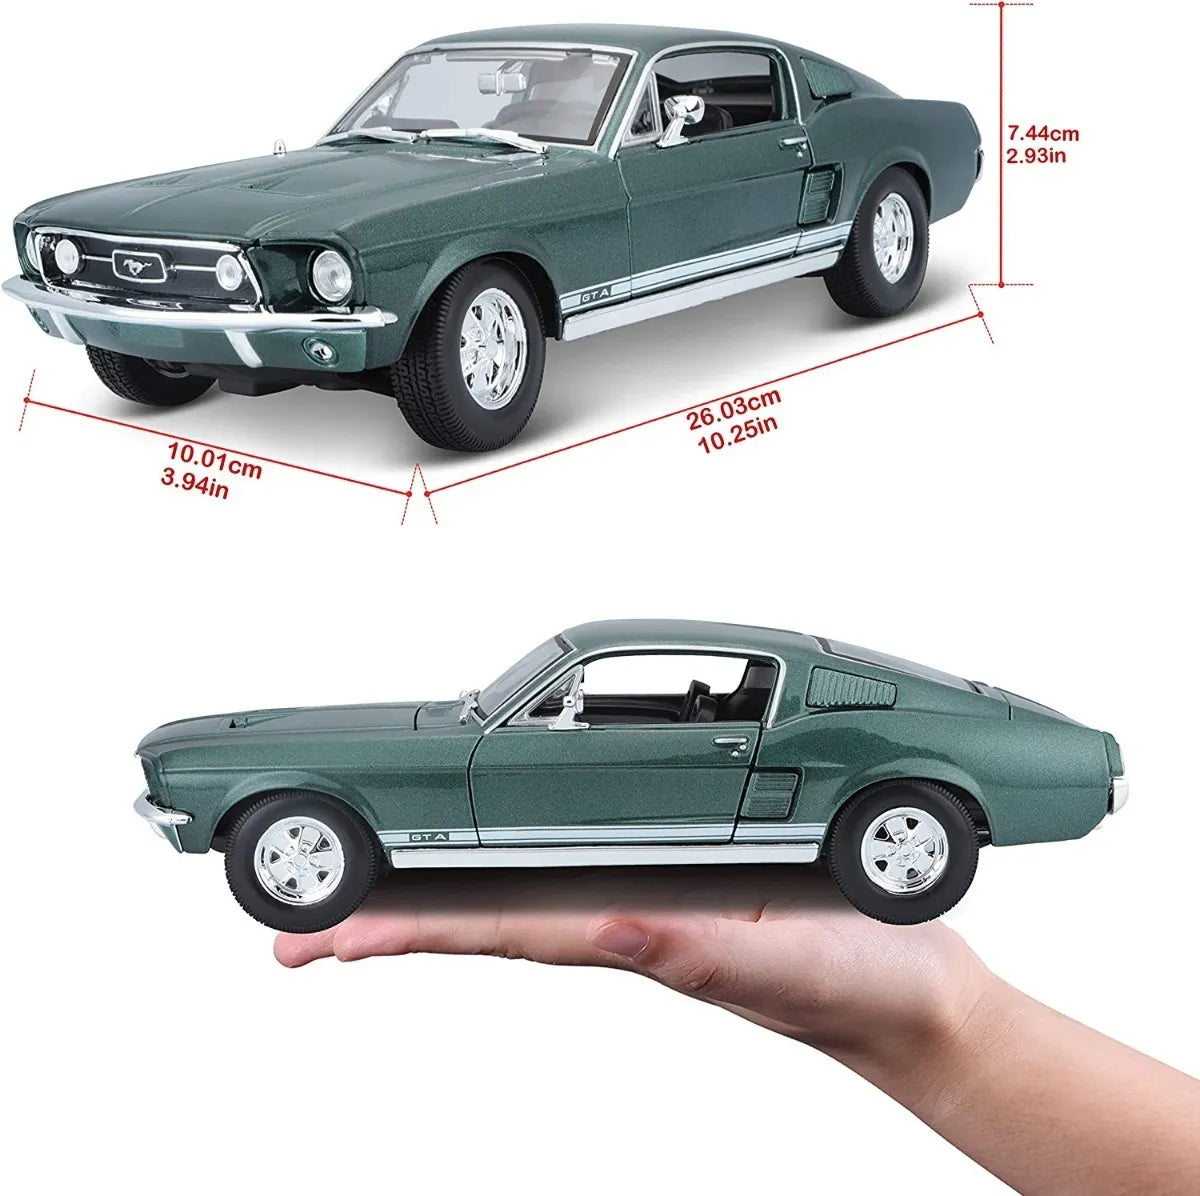 Auto Coleccionable 1:18 1967 Ford Mustang Gta Fastback